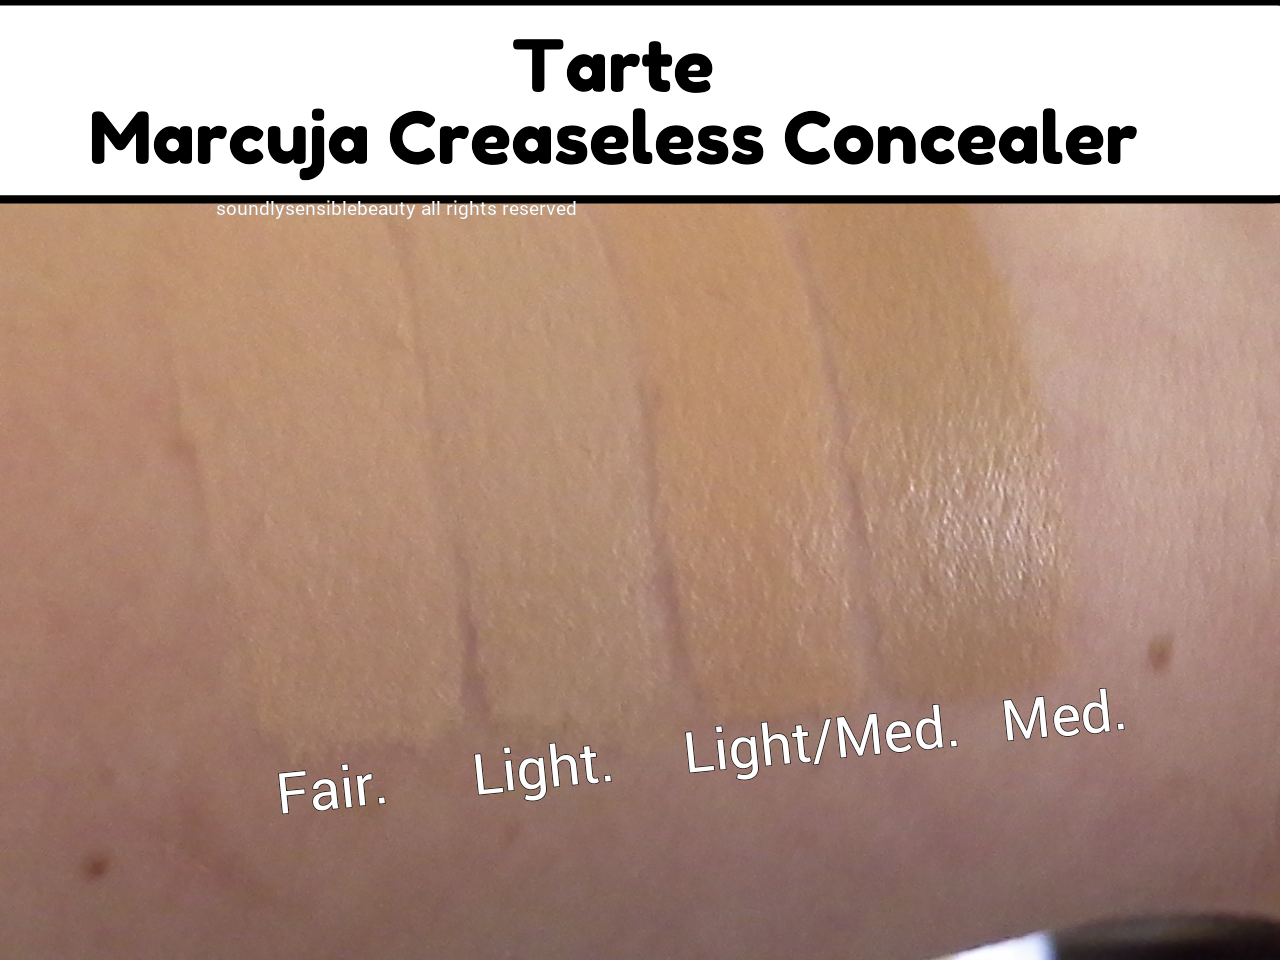 Tarte Marcuja Creaseless Concealer (Full Cover Concealer); Review &  Swatches of Shades